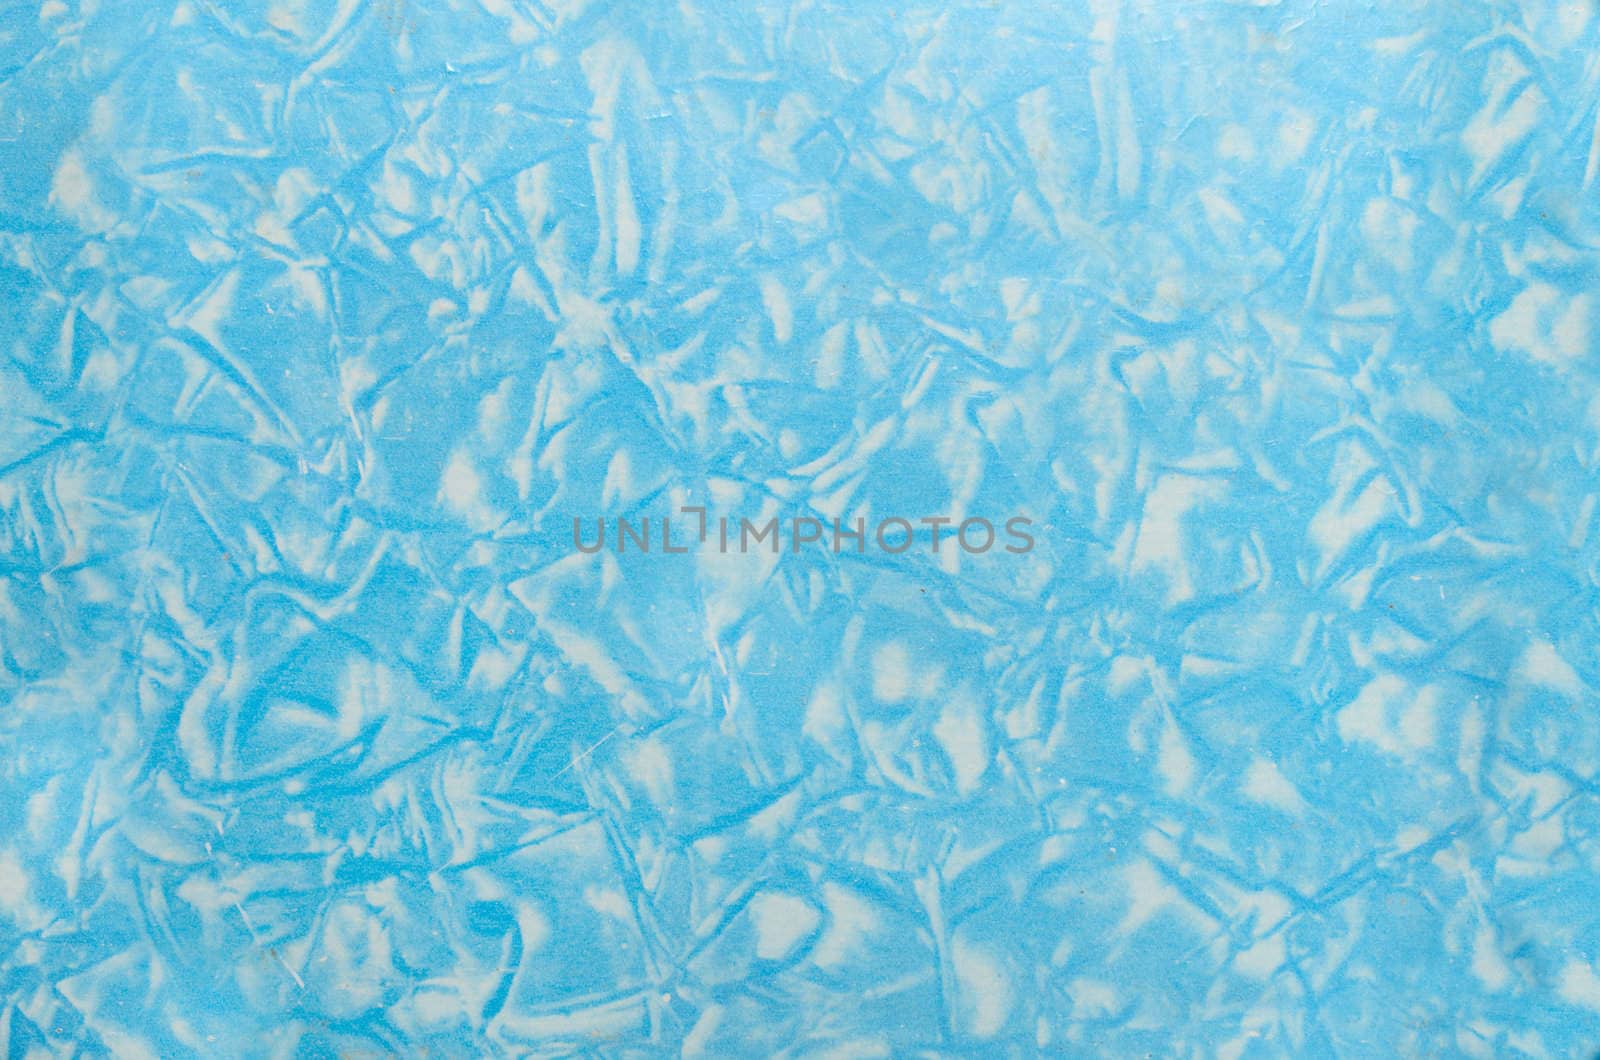 Chaotic blue texture over the grunge plastic background